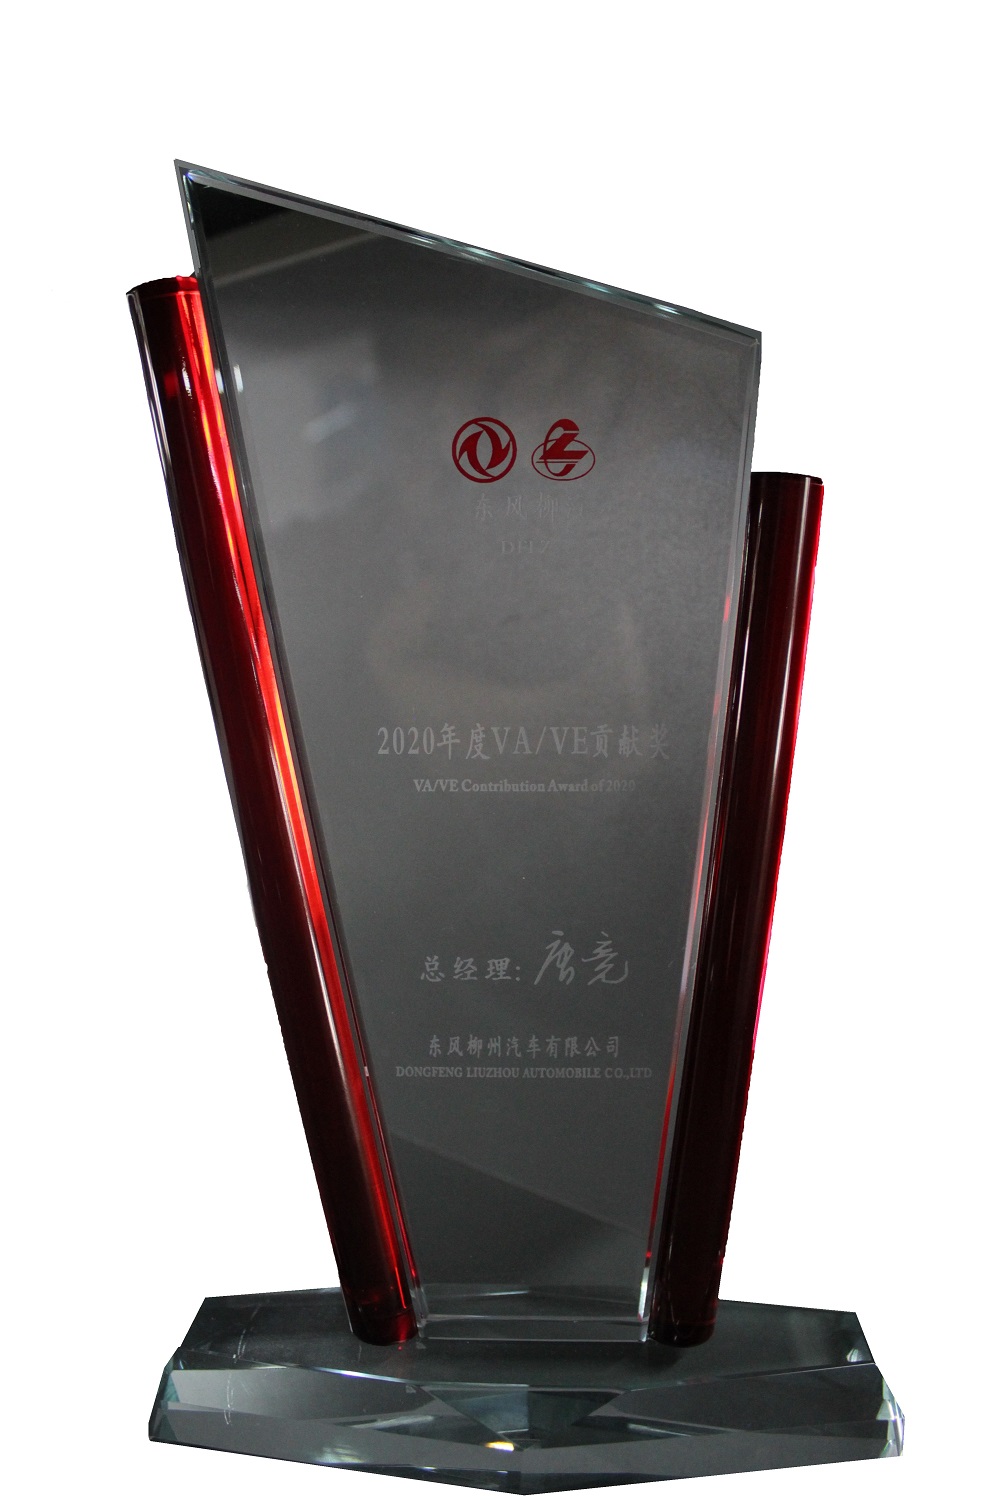 VA/VE Contribution Award of 2020 from Dongfeng Liuzhou Automobile